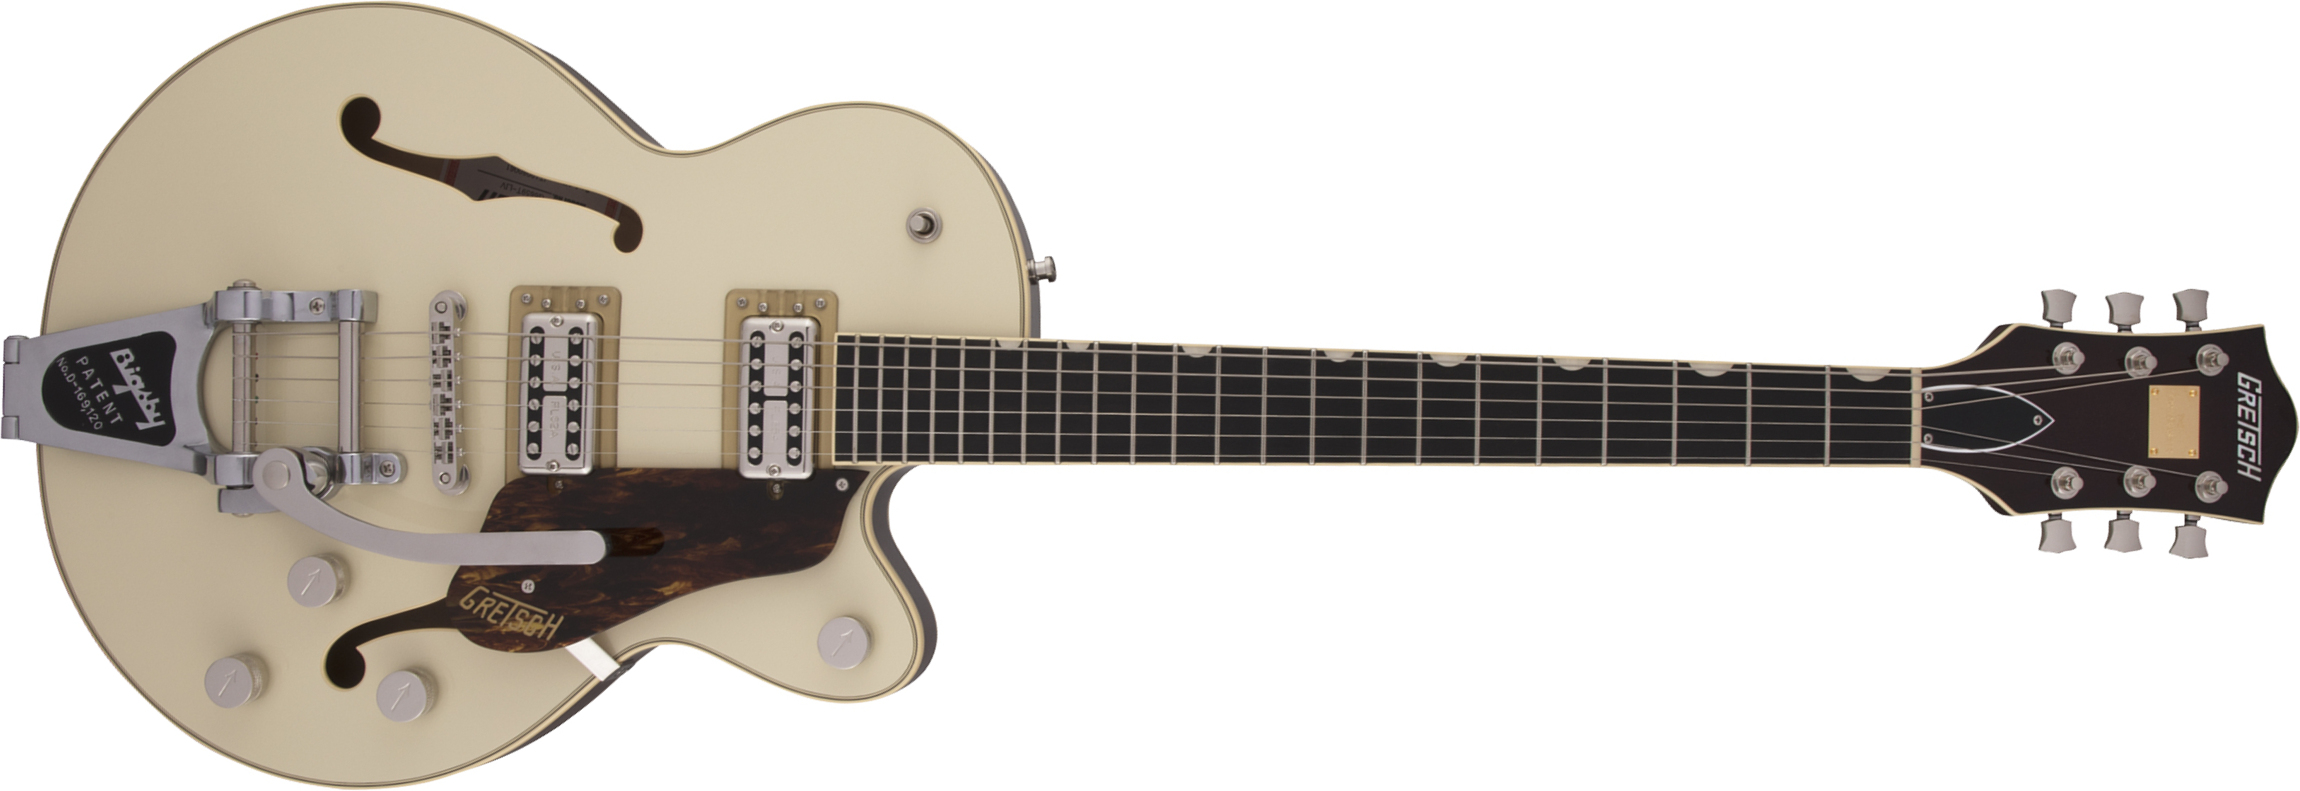 Gretsch G6659t Broadkaster Jr Center Bloc Players Edition Nashville Pro Japon Bigsby Eb - Two-tone Lotus Ivory/walnut Stain - Guitare Électrique 1/2 C